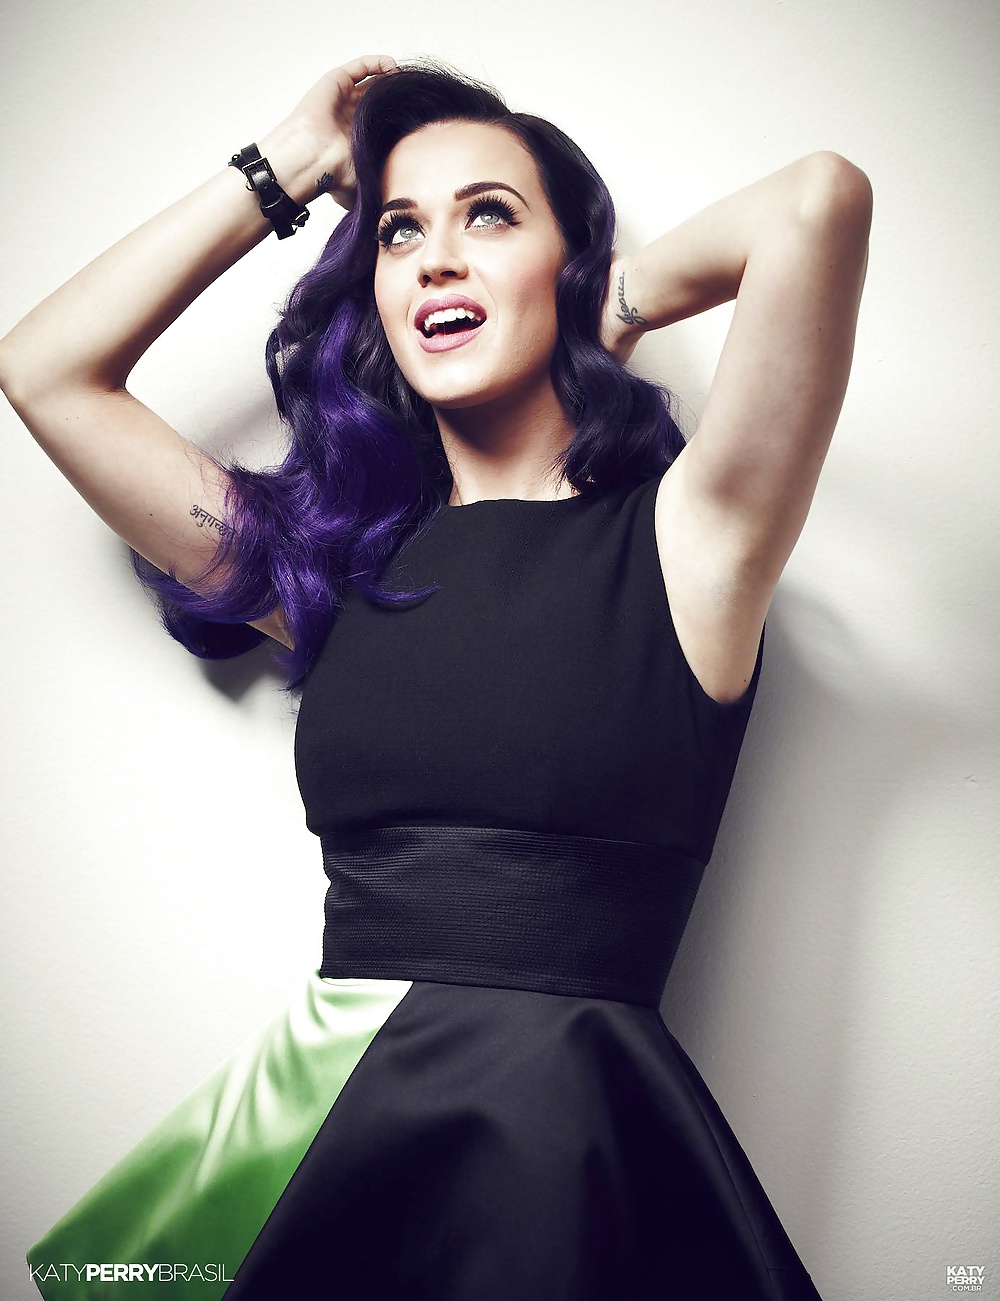 Katy Perry Aisselle Chaumes #30976751